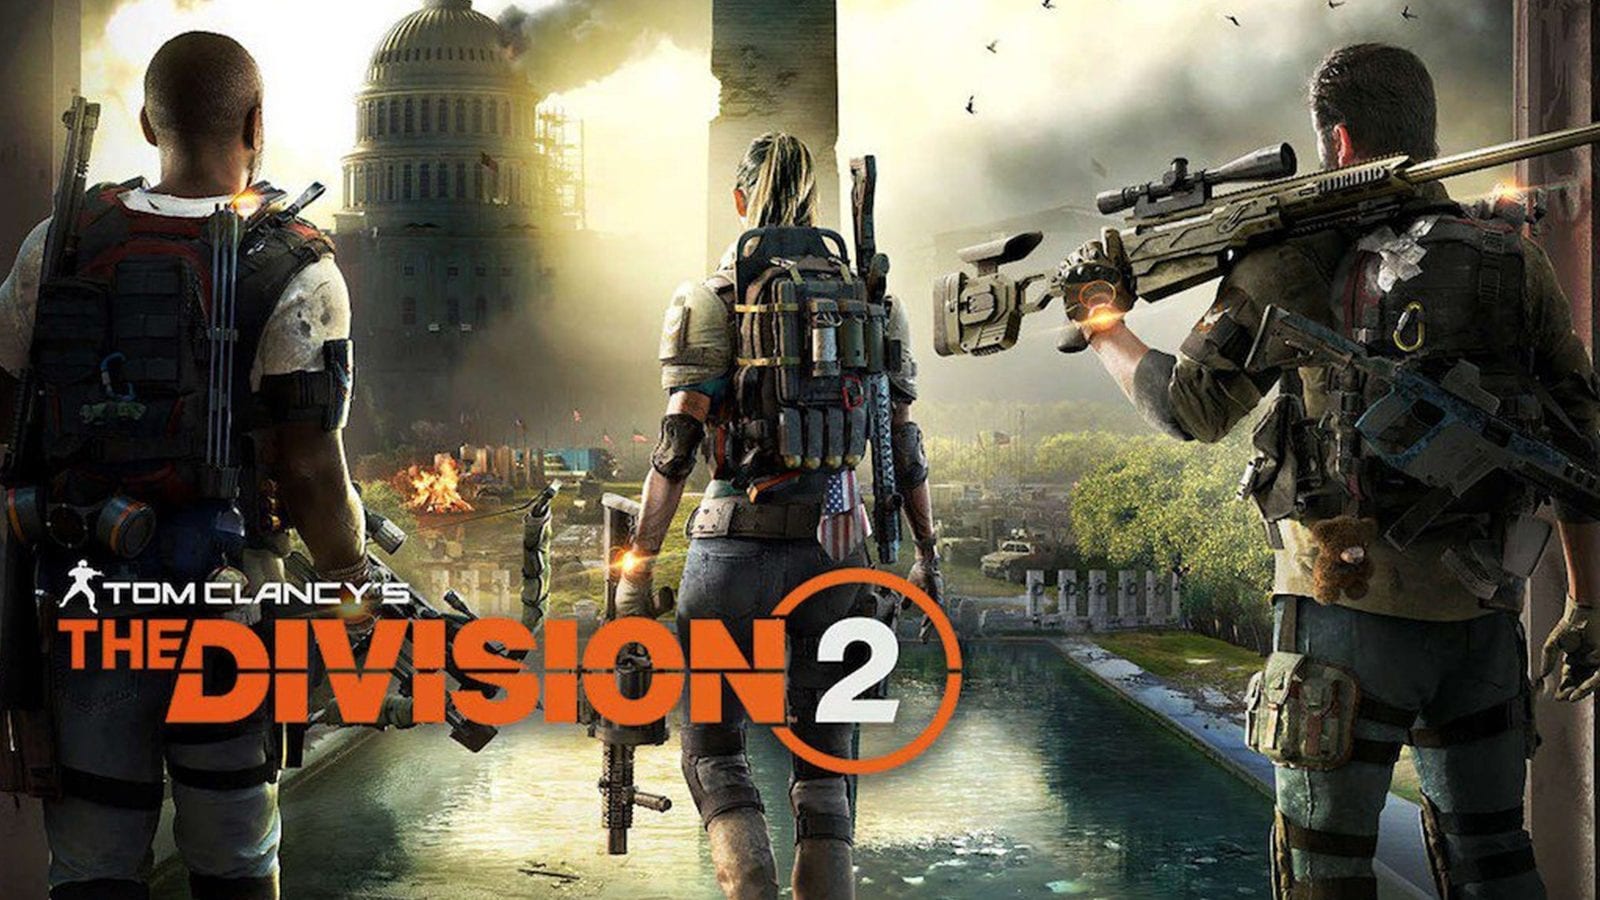 The Division 2 has a release date of March 15, 2019